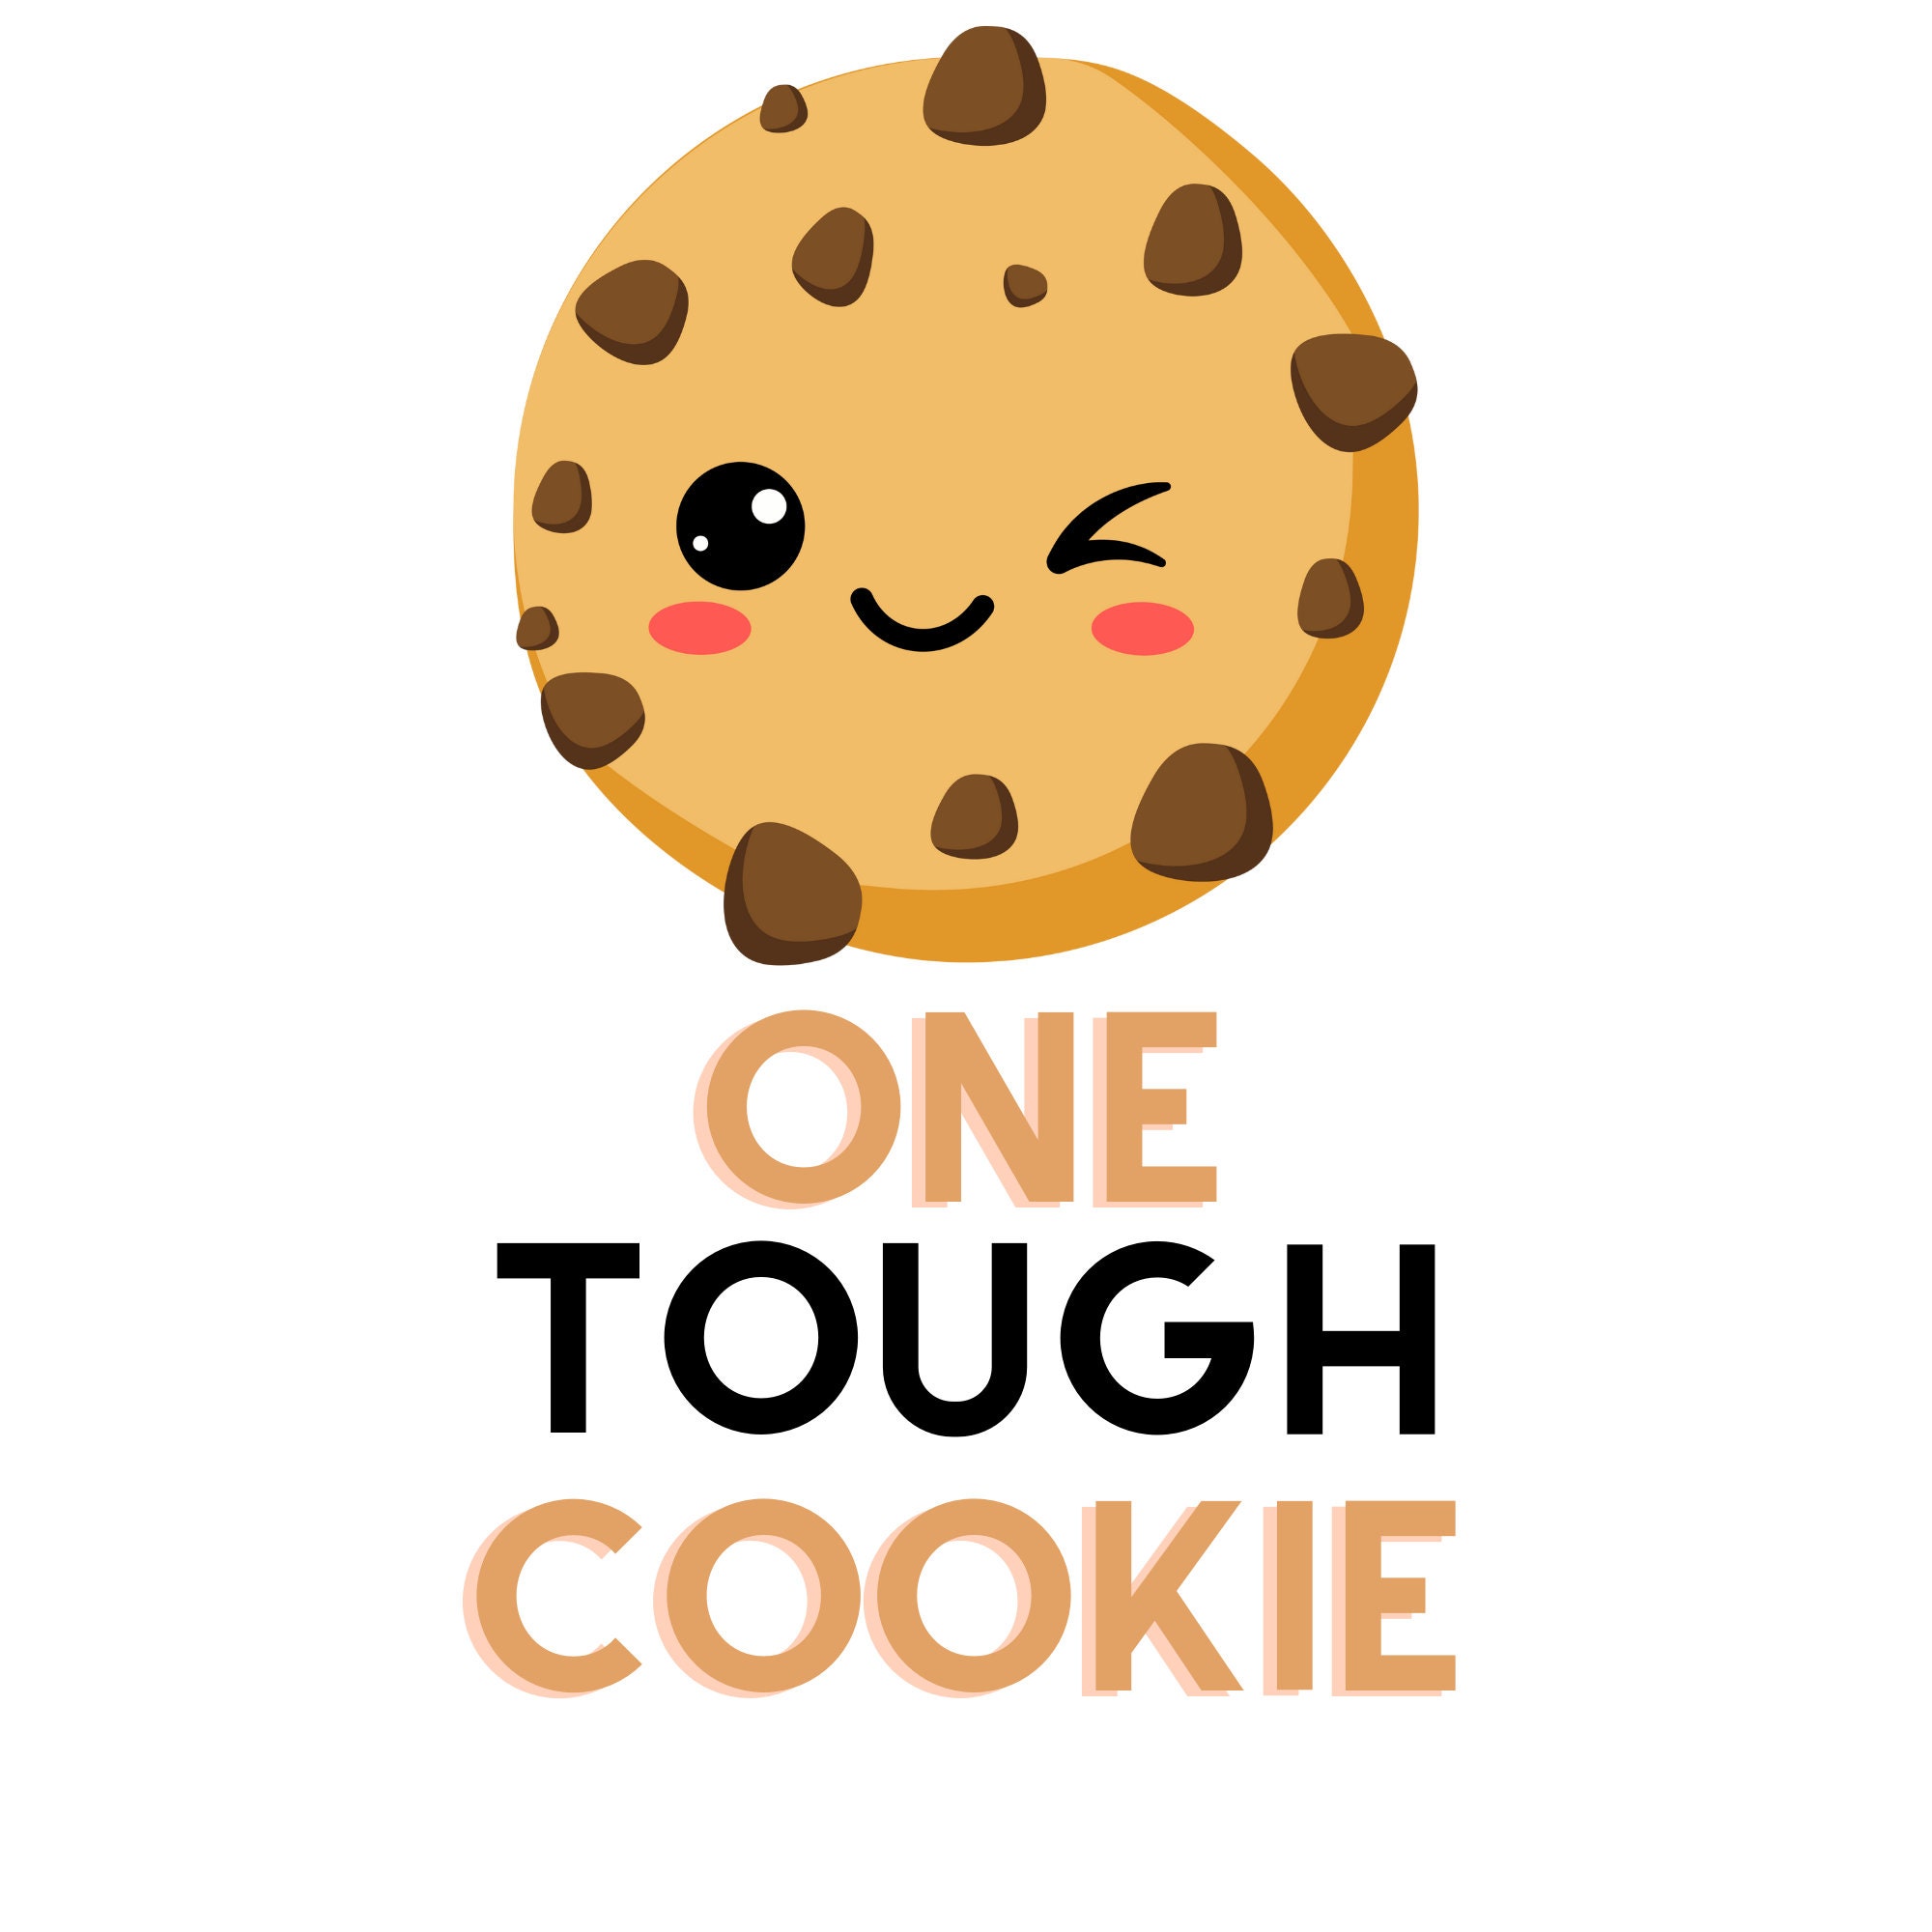 one-tough-cookie-instant-digital-download-print-then-cut-png-etsy